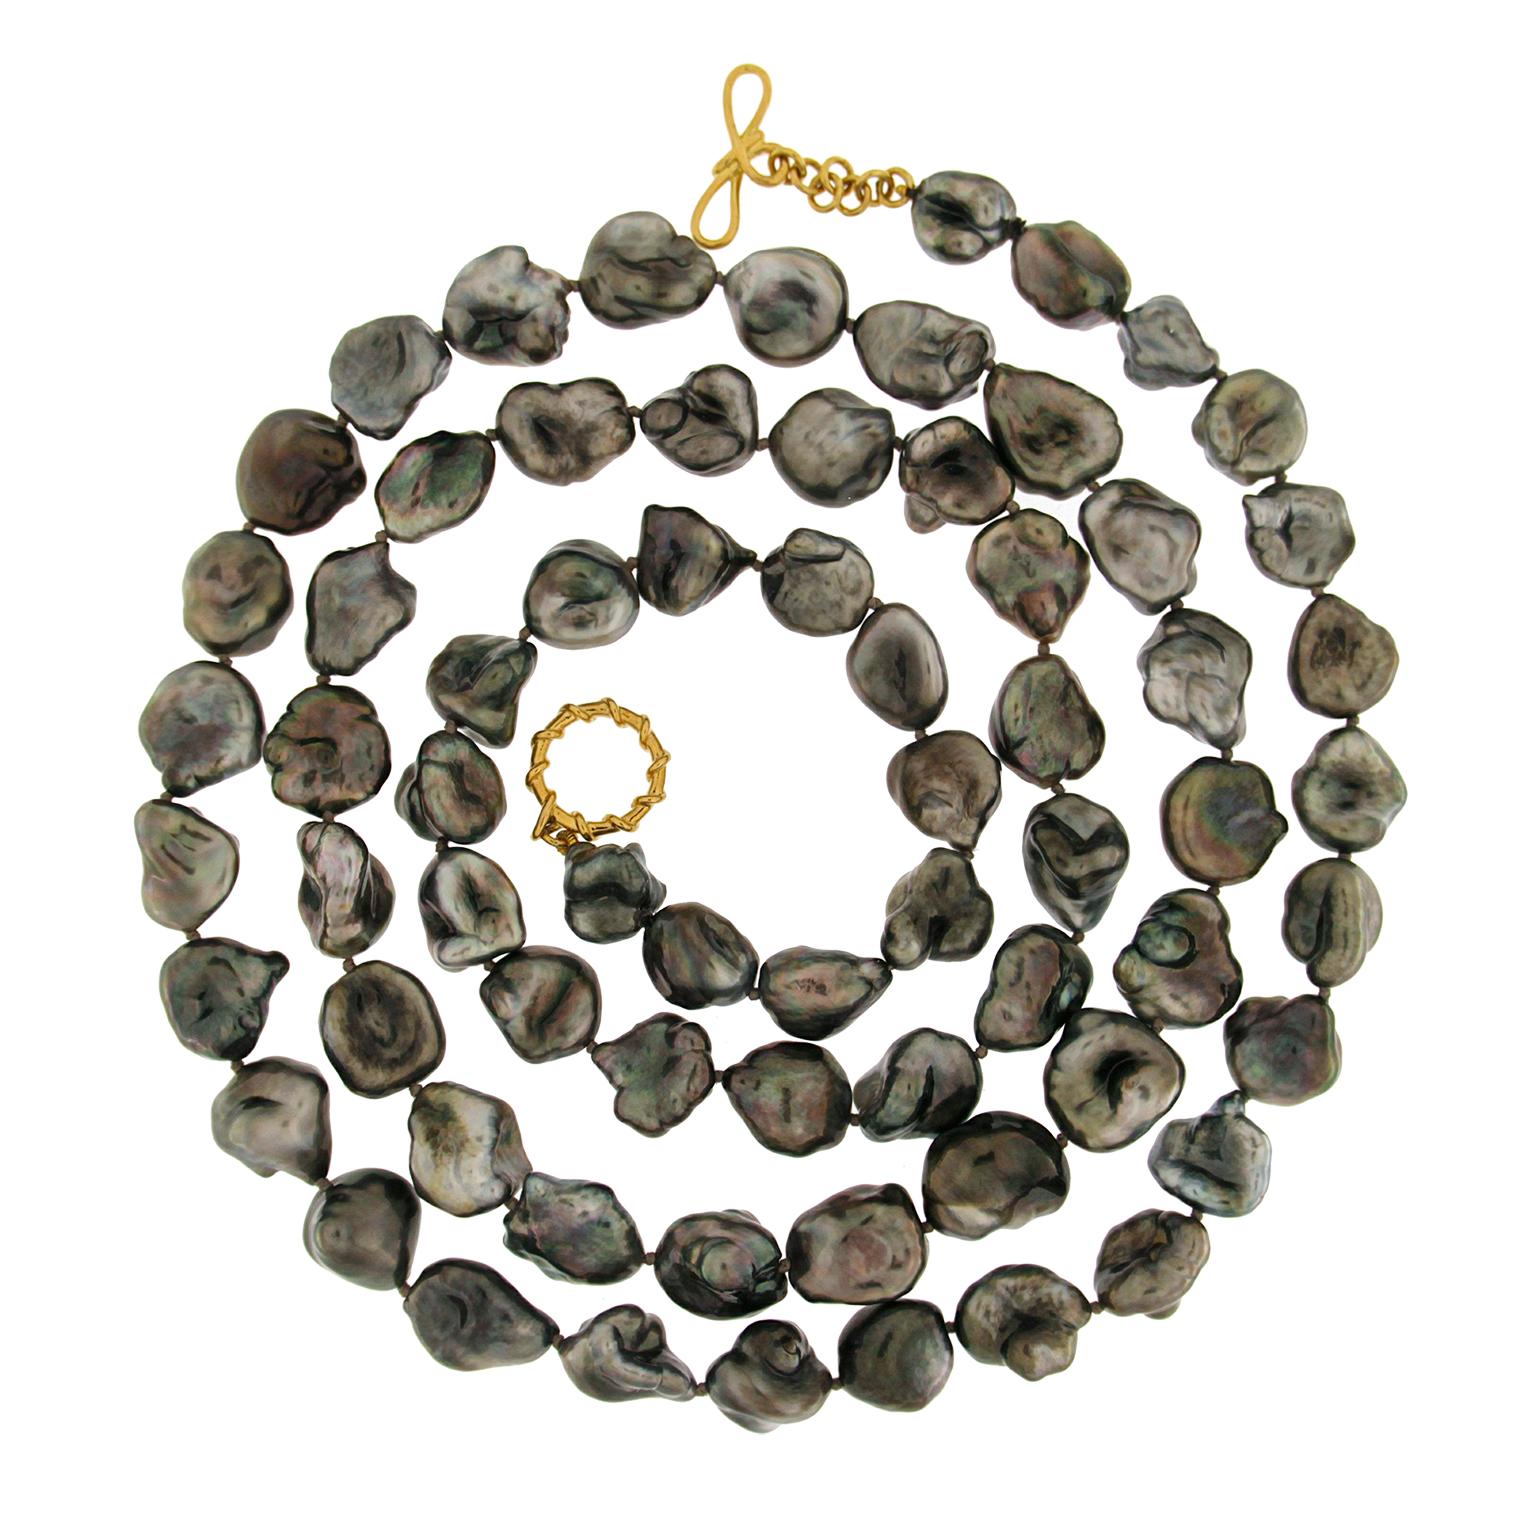 Valentin Magro Tahitian Keshi Pearl Necklace blend two distinctive gems. Tahitian pearls are prized for their dark body colors and regal overtones such as gold and purple. This strand uses keshi pearl versions, adding a variety of shapes and strong